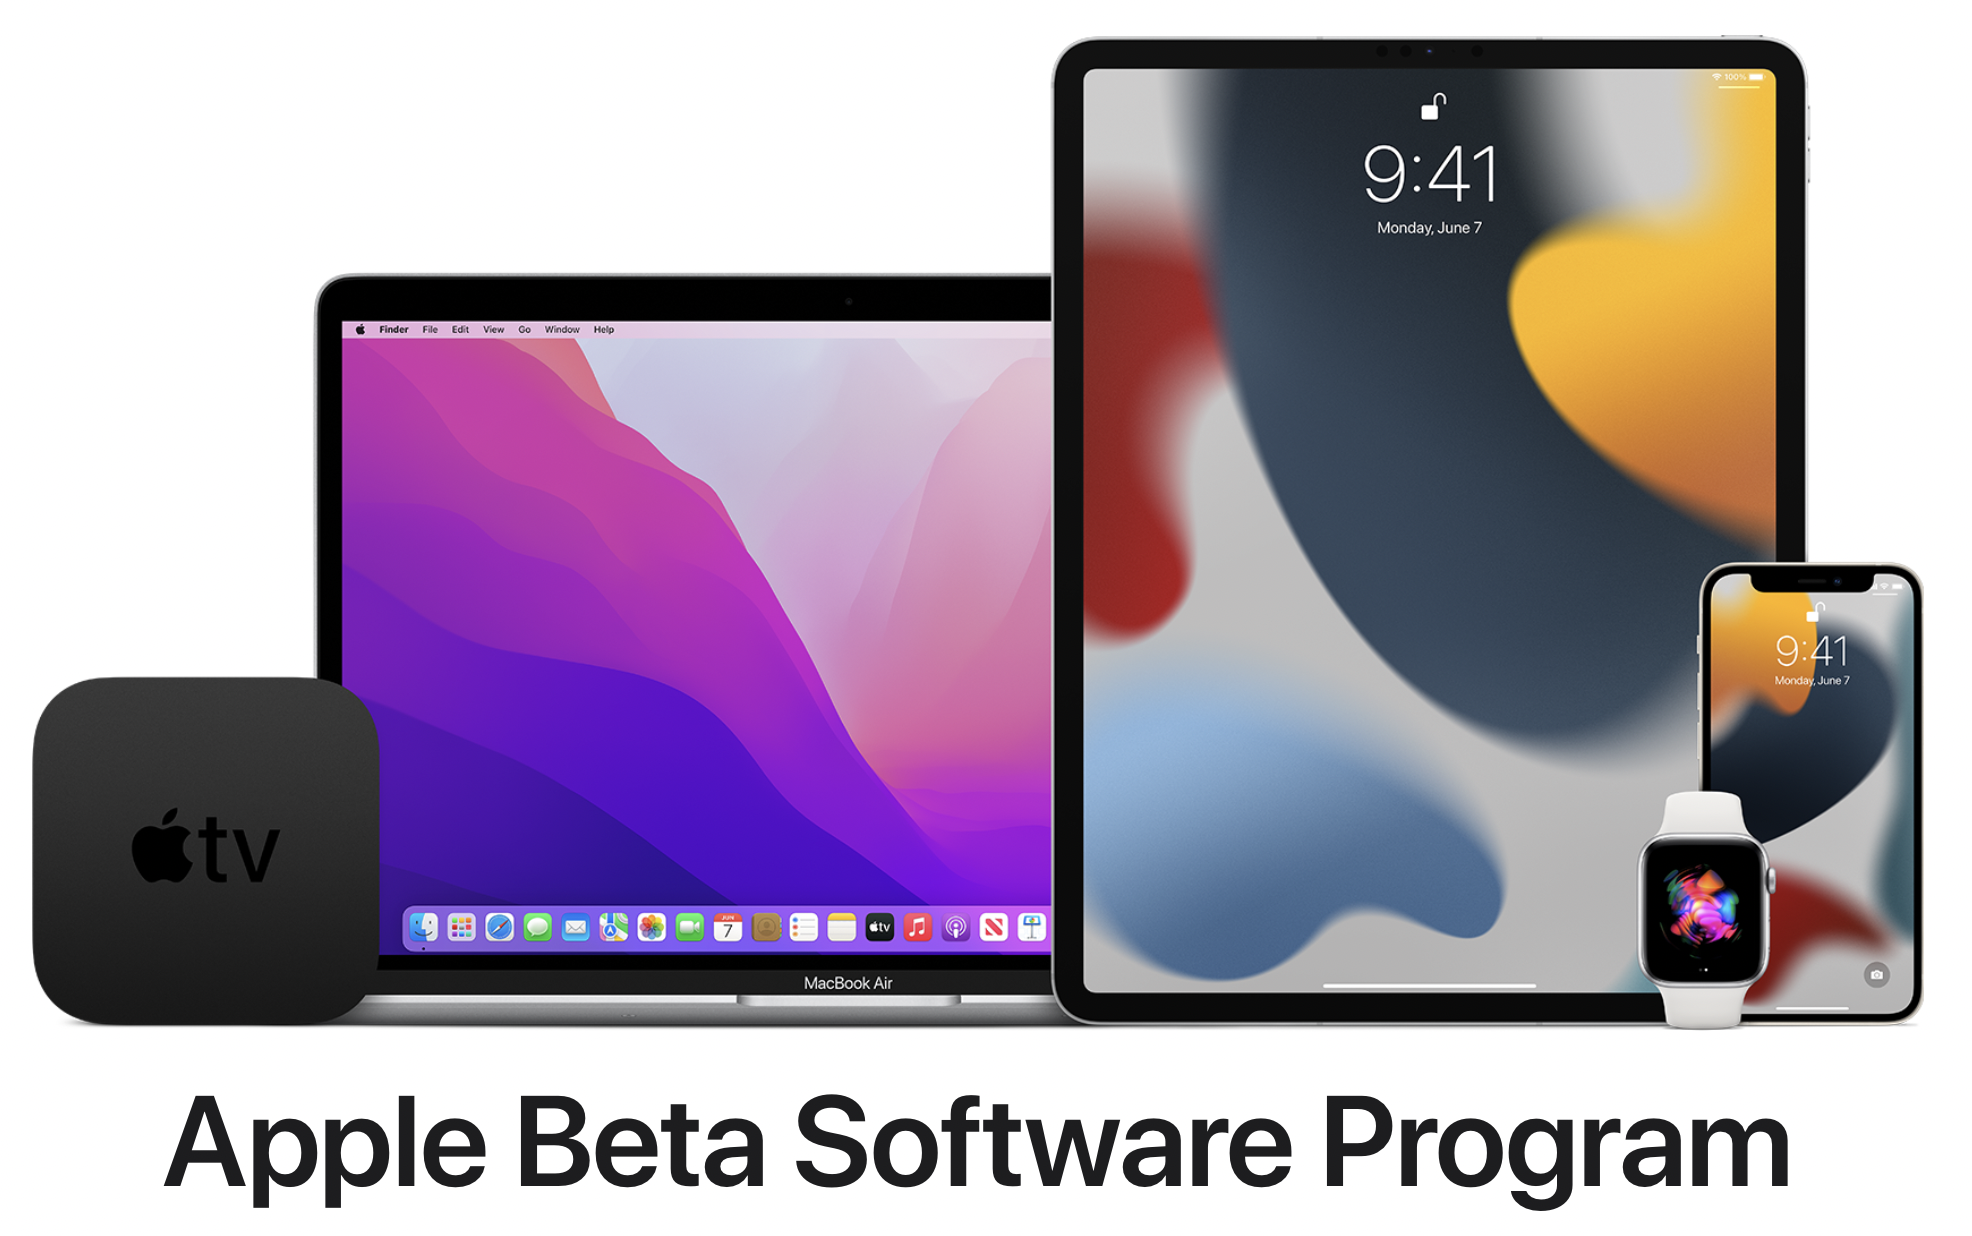 Why You Should Be Careful When Installing a Beta OS